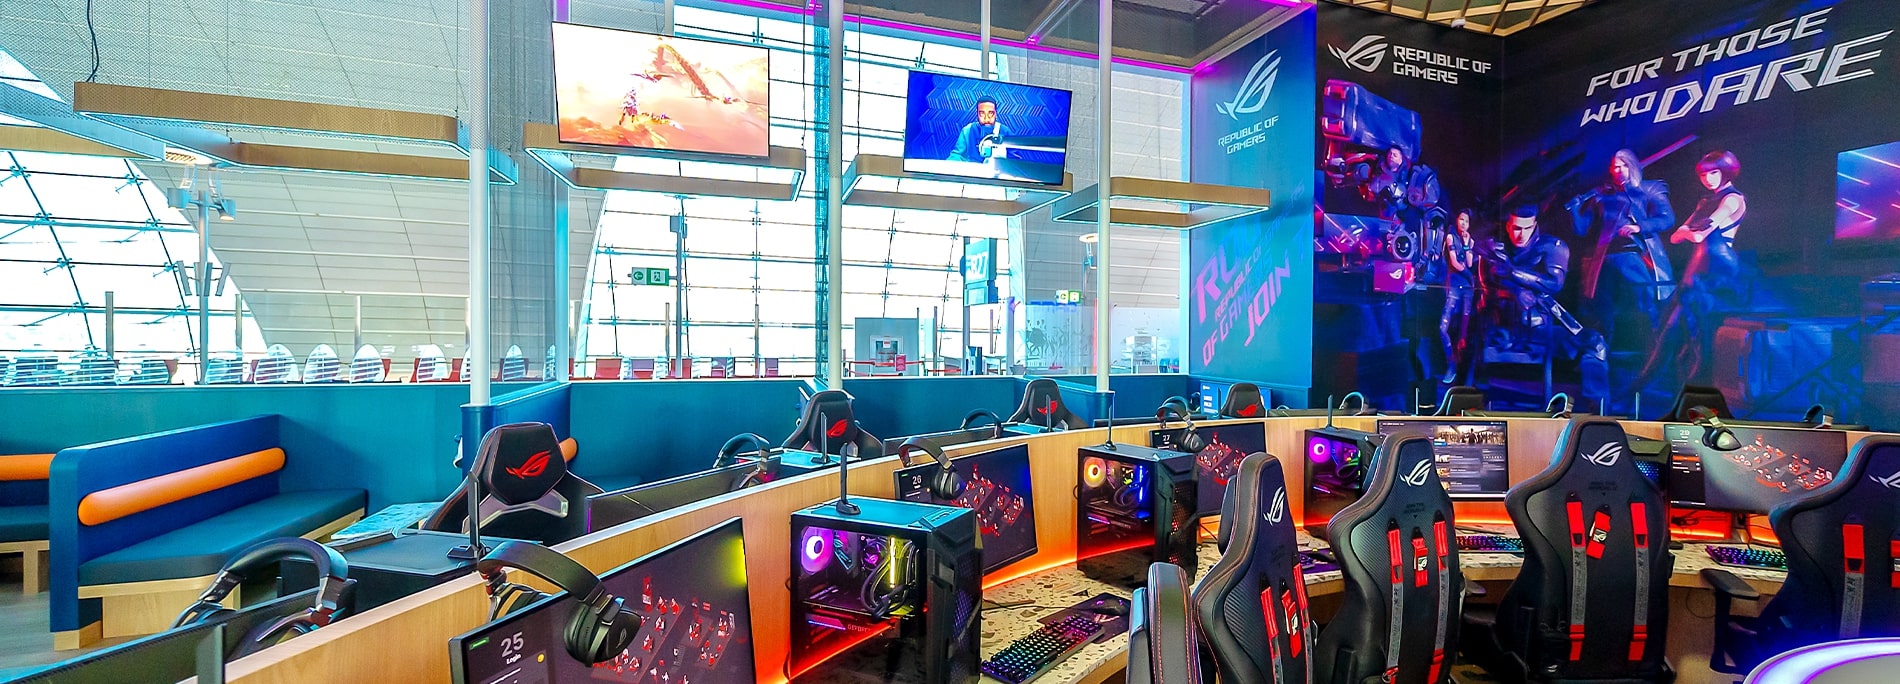 ASUS ROG GEAR FEATURED IN NEW GAMING LOUNGE AT DUBAI INTERNATIONAL (DXB)